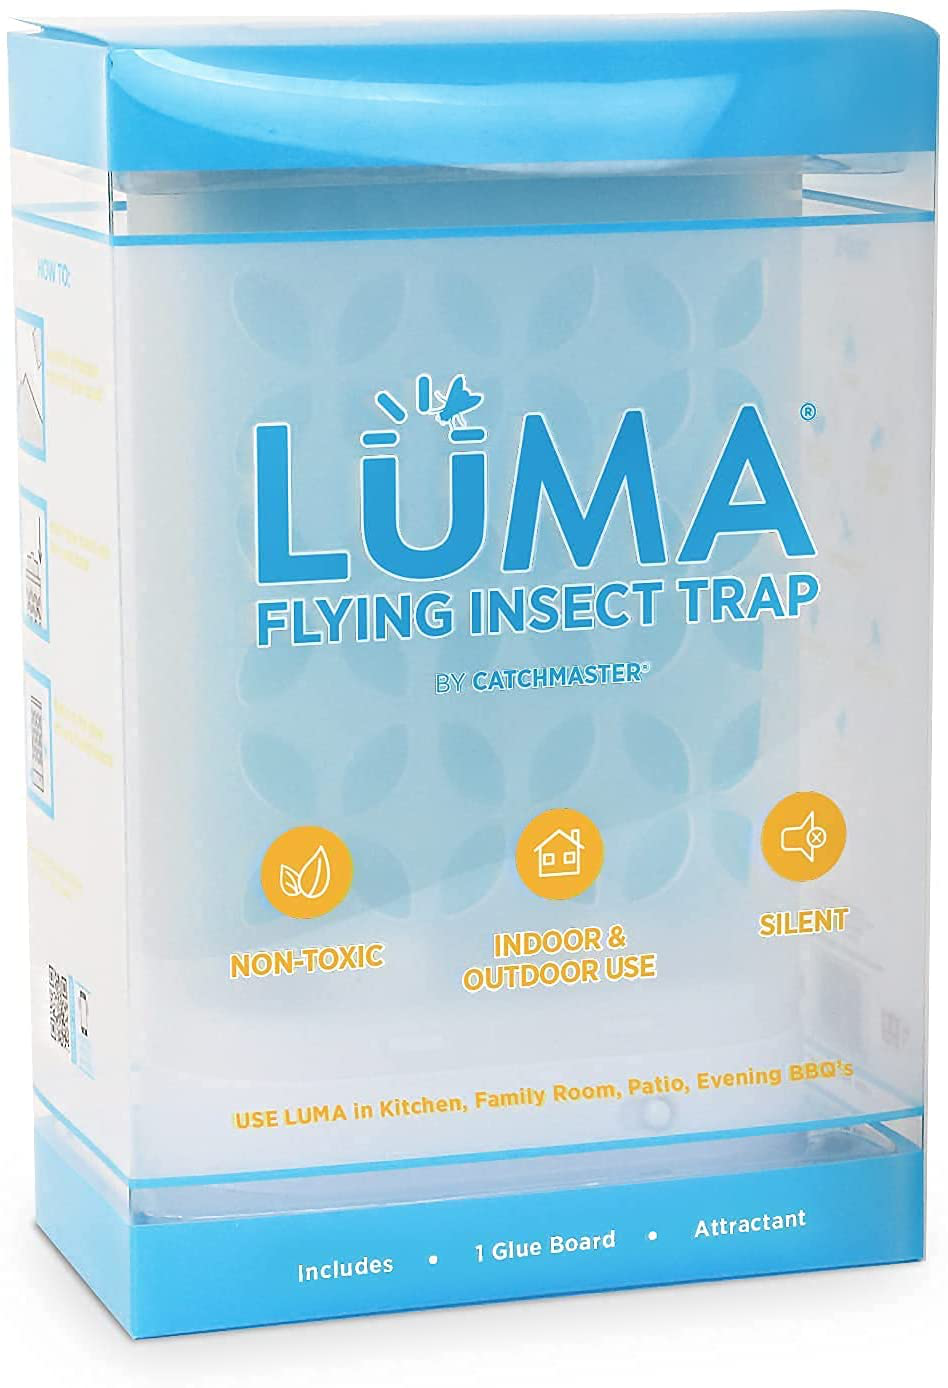 Catchmaster Luma Flying Insect Trap - for Flies, Moths, Gnats, Fruit Flies - Non-Toxic Fly Trap